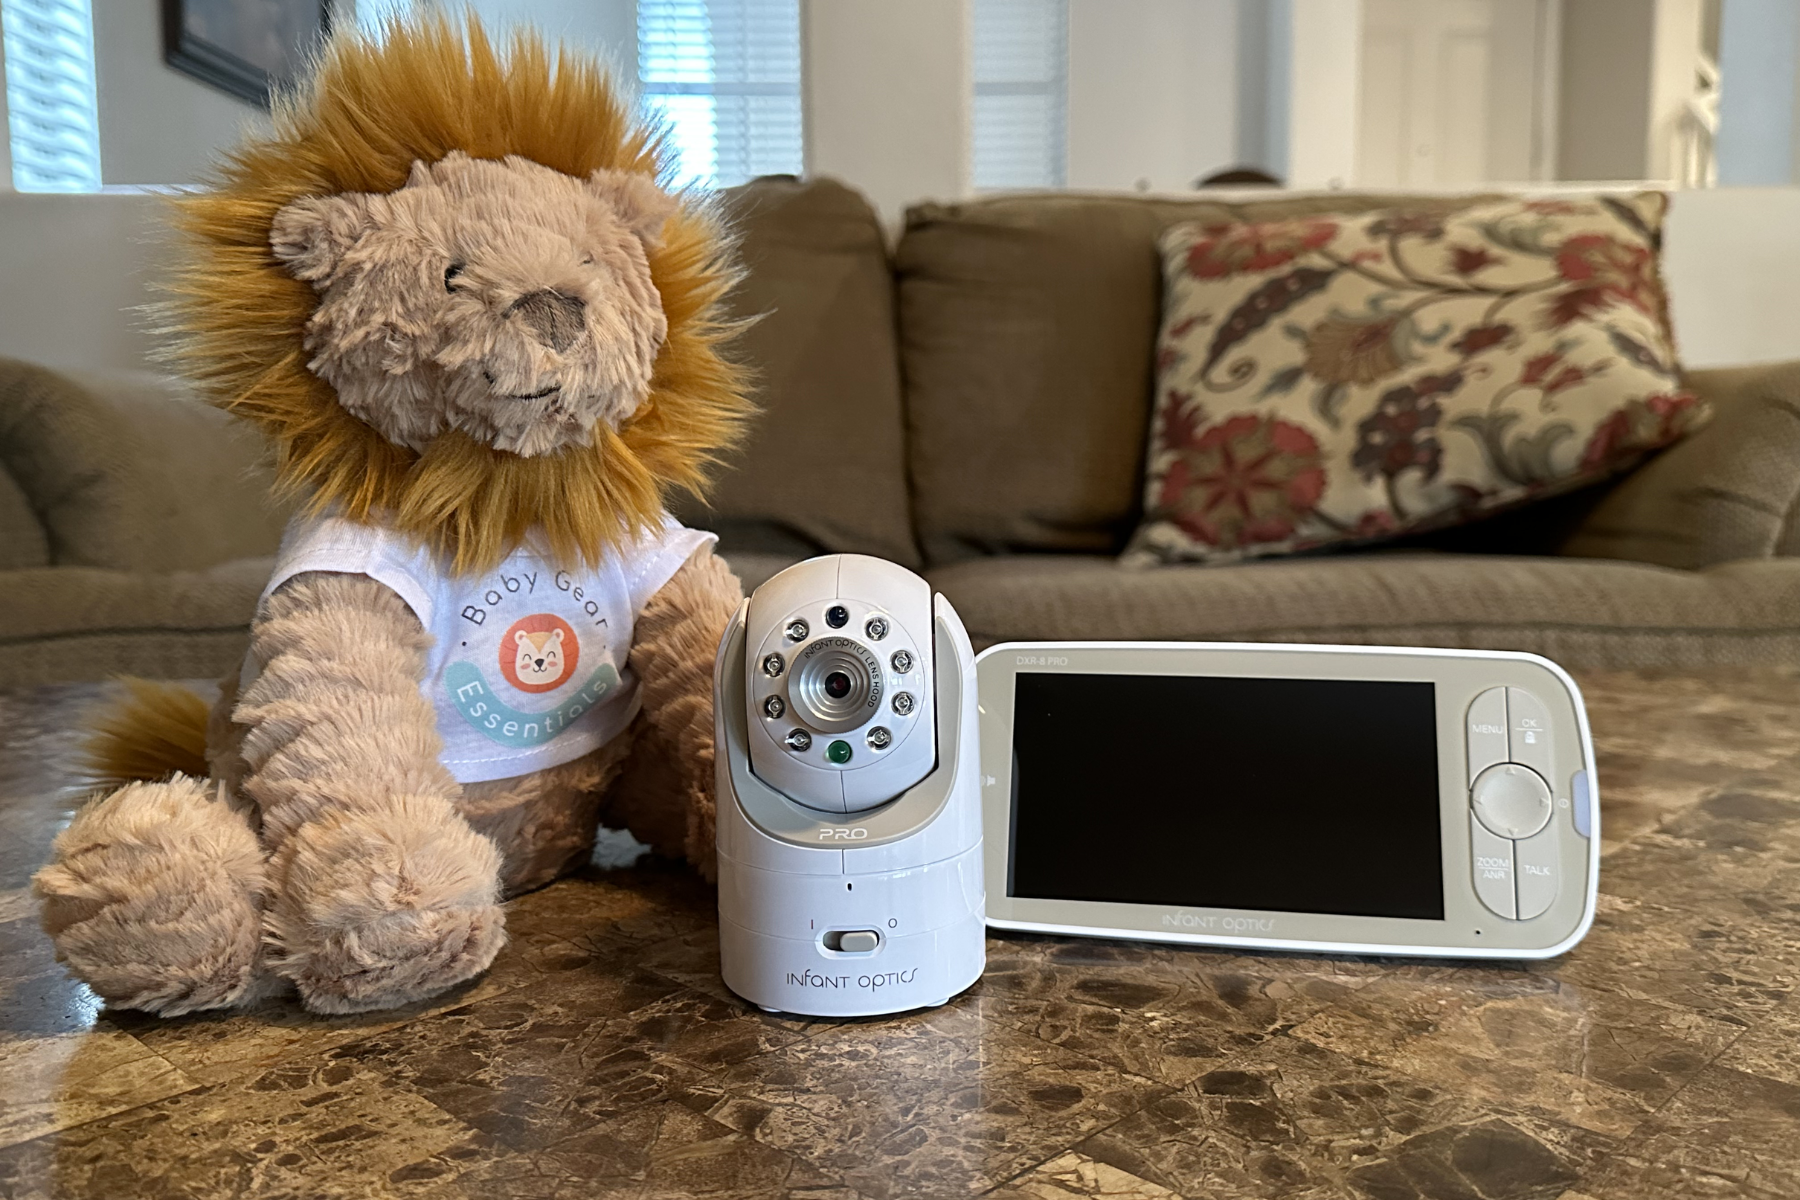 Infant Optics DXR-8 Pro monitor and camera with the Baby Gear Essentials lion